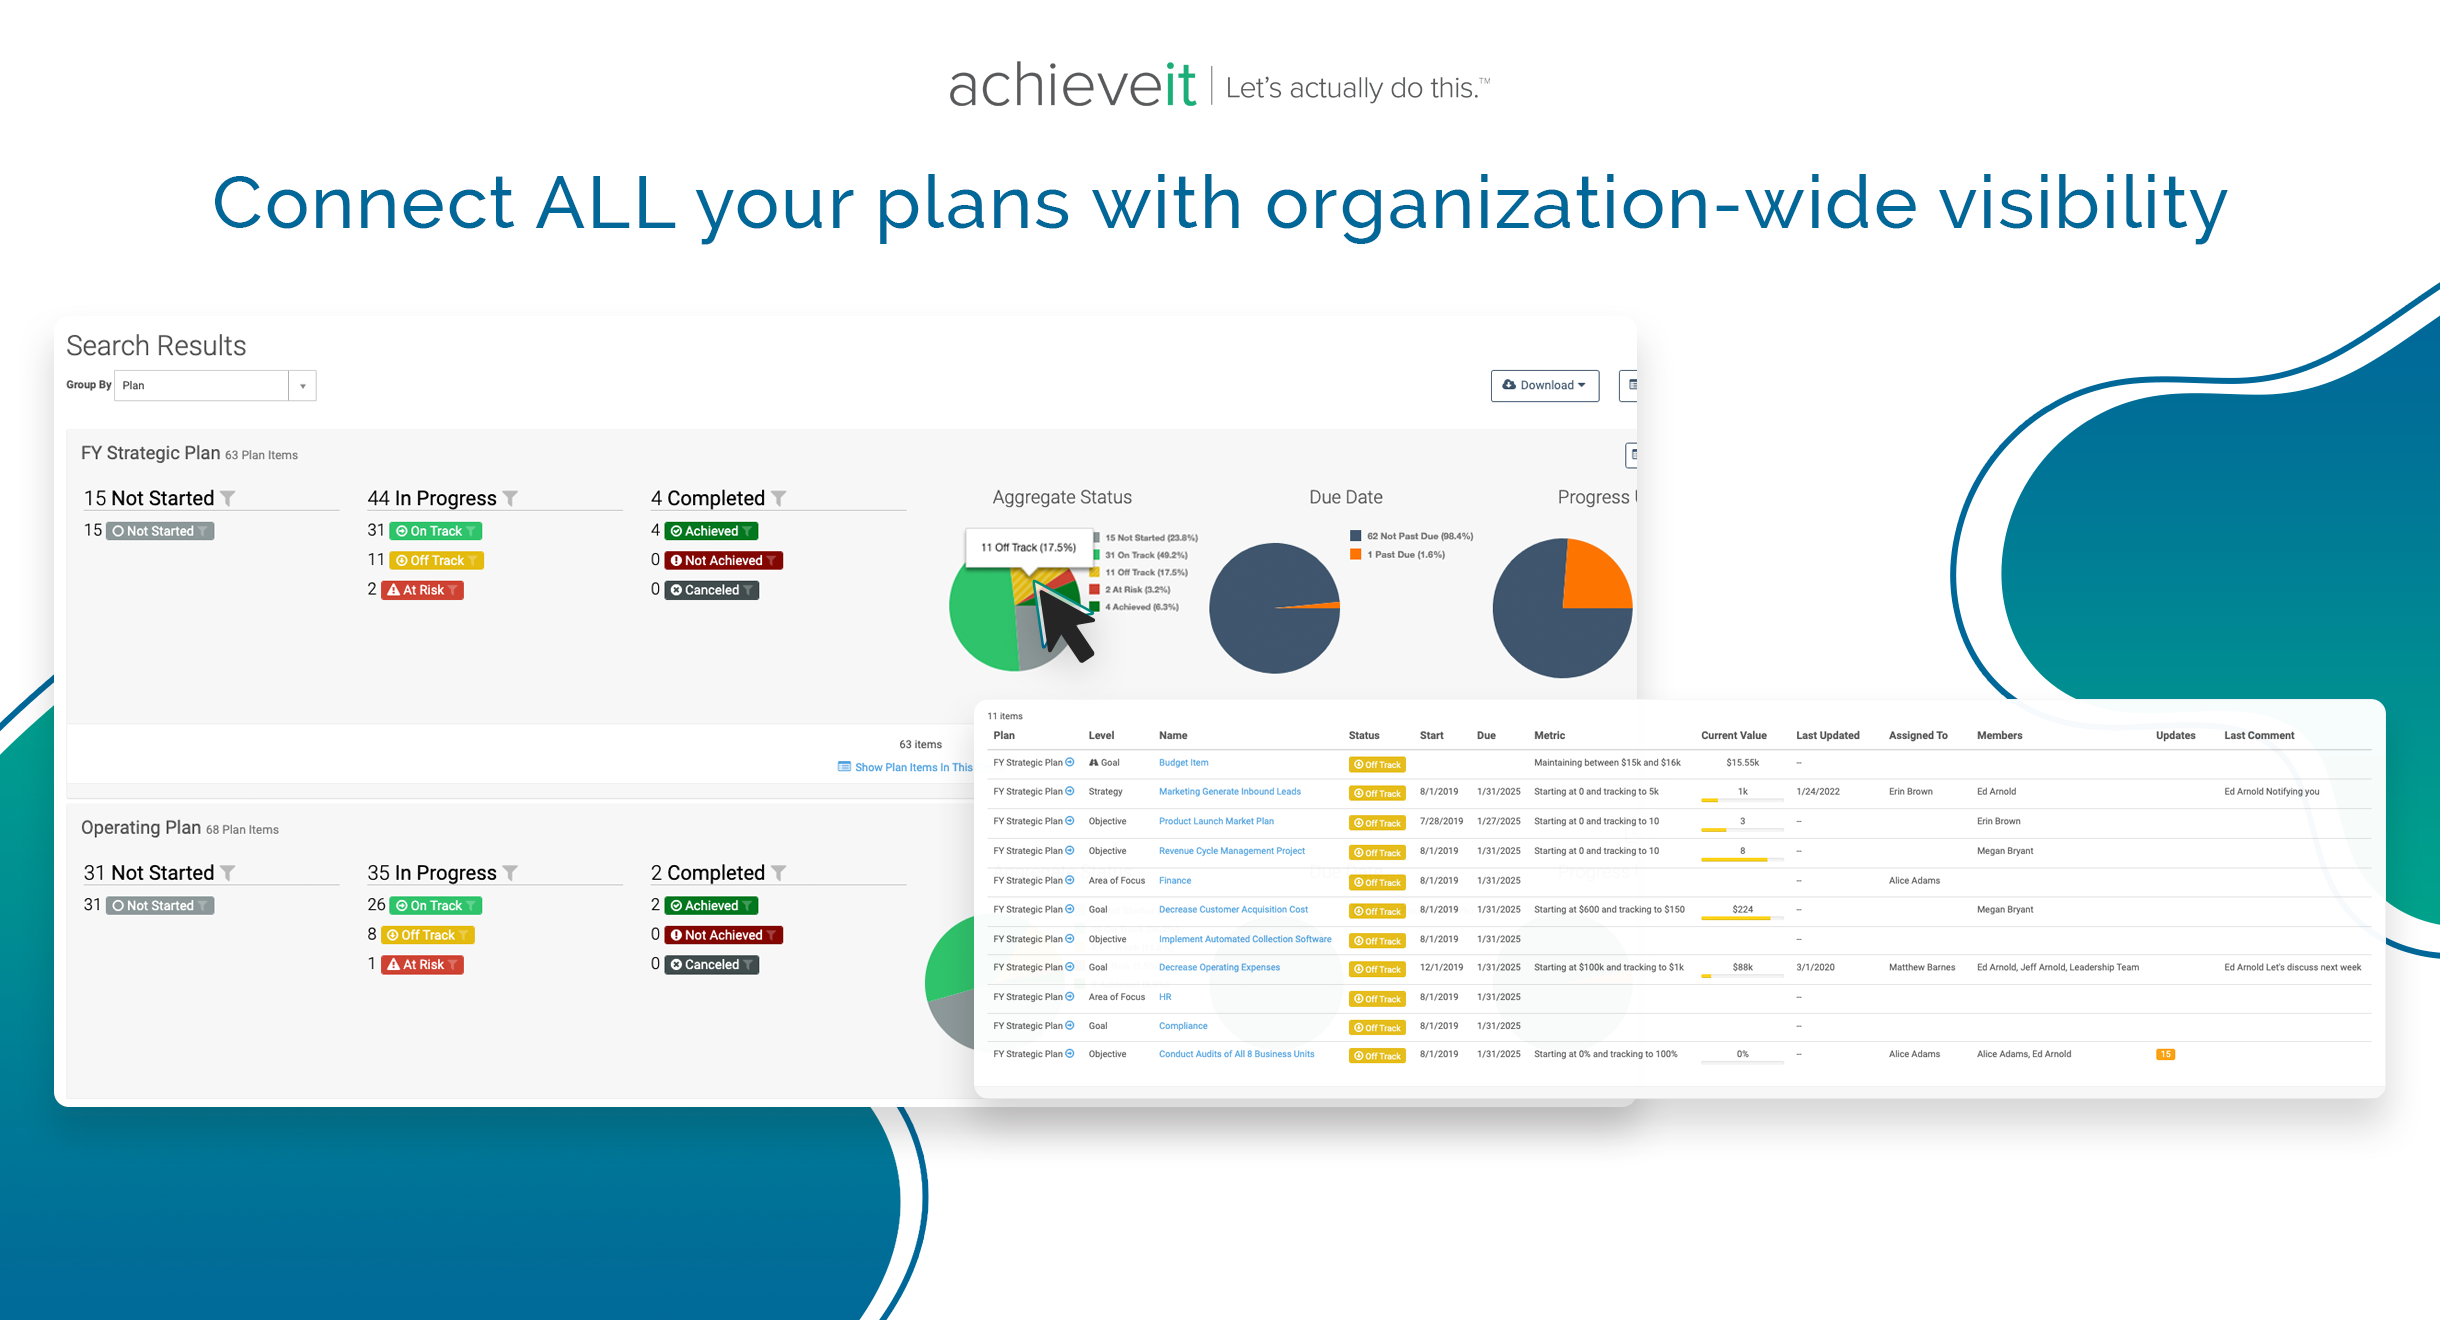 Tired of running into information gaps across siloes? Leverage real-time insights & filters across all of your plans to easily understand progress, dependencies, and risks.